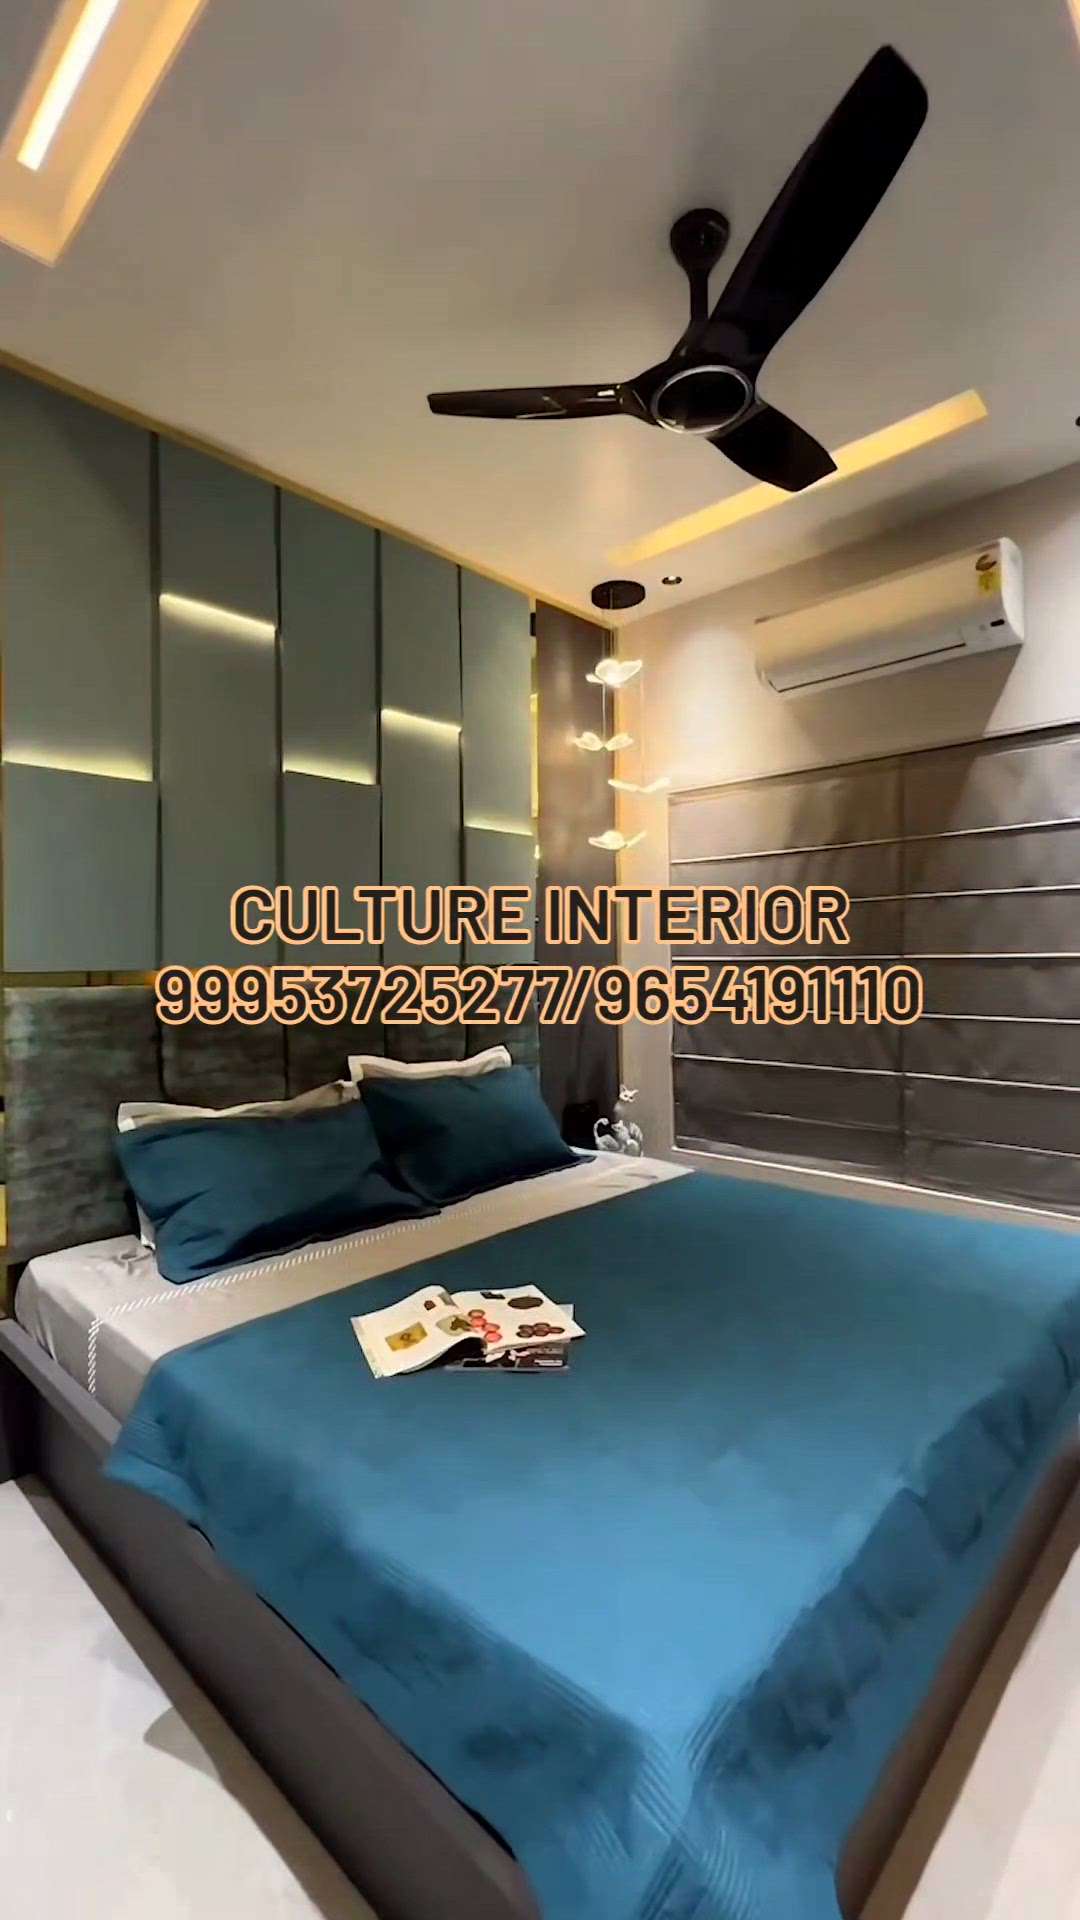 Find here the best home interiors and get design your Entire Home Including your ✓Livingroom ✓Bedroom ✓Kitchen ✓Bathroom and everything.
.
.
.
contact us  9953725277/ 9654191110
Email I'd: cultureinterior2017@gmail.com
Website: www.cultureinterior.in

Please do like ,share & subscribe our you tube channel https://youtube.com/channel/UC9Hm9090aOlJOcszdAb6-PQ
.
.
.
#interiors #interiordesign #interior #design #homedecor #decor #architecture #home #interiordesigner #homedesign #interiorstyling #furniture #interiordecor #decoration #art #luxury #designer #inspiration #interiordecorating #style #homesweethome #livingroom #interiorinspo #furnituredesign #handmade #homestyle #interiorstyle #interiorinspirations